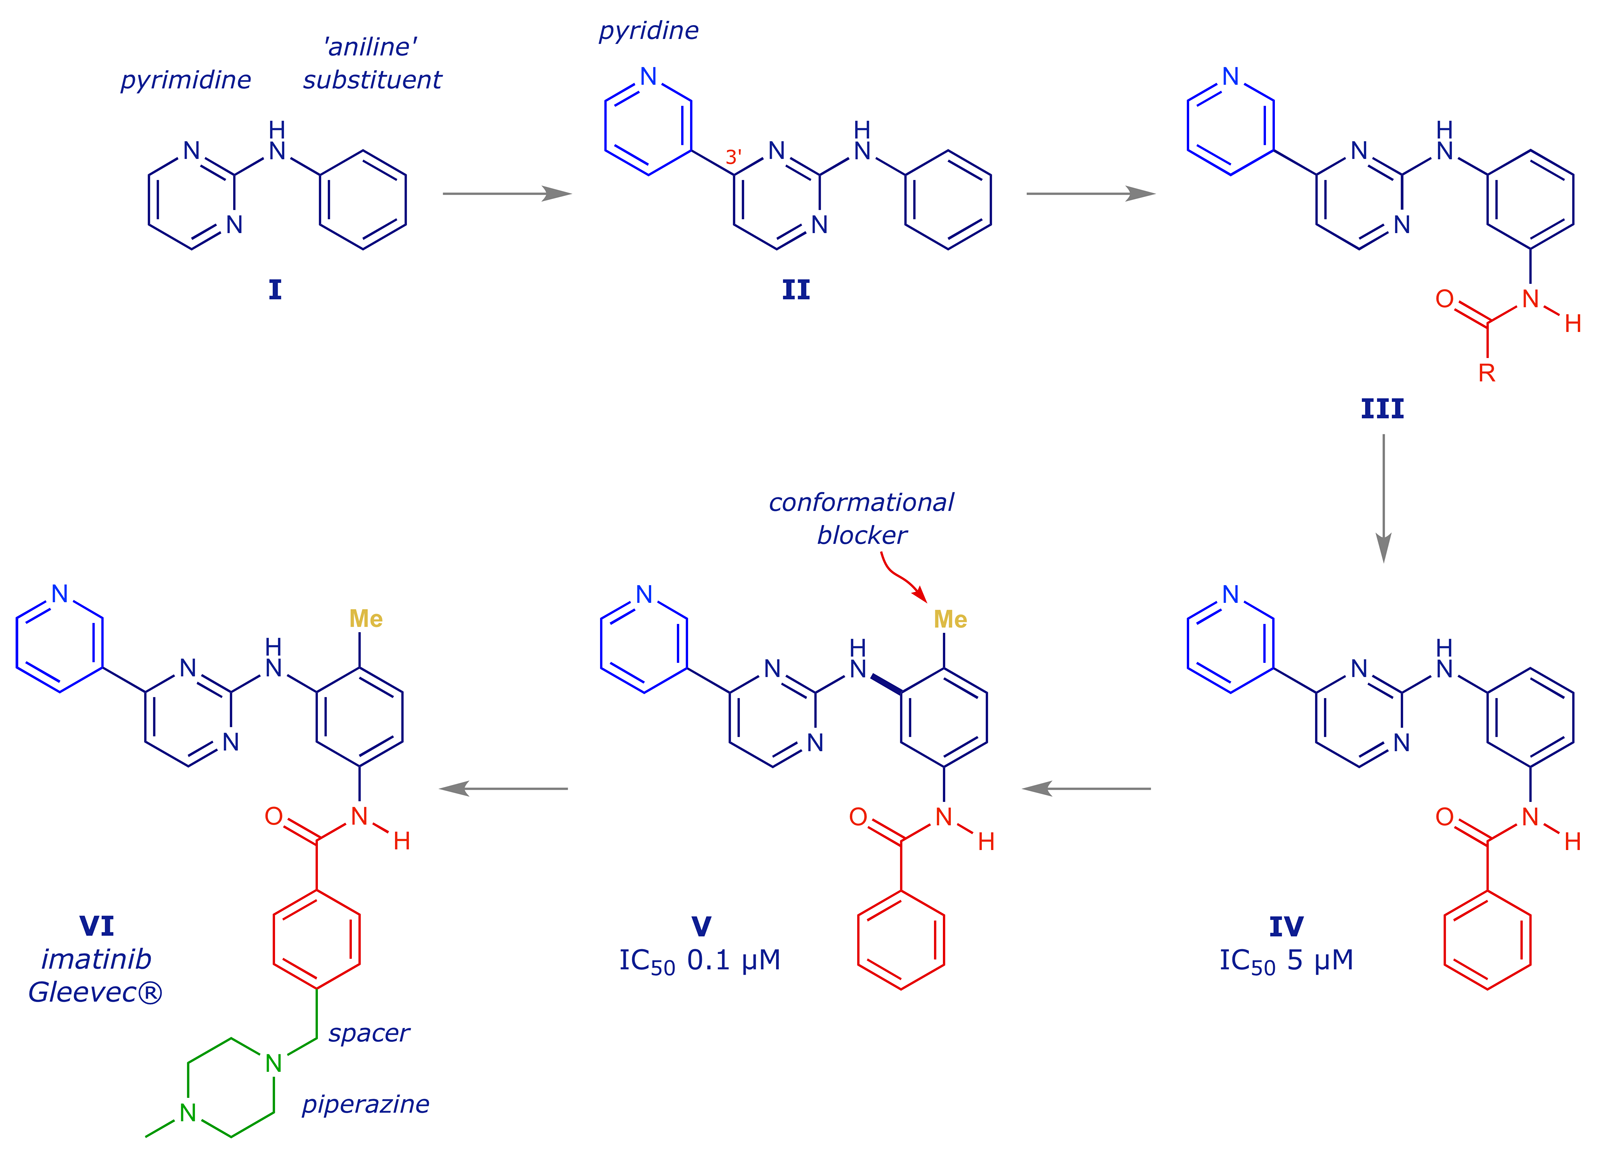 Key intermediates during the optimisation of the imatinib structure